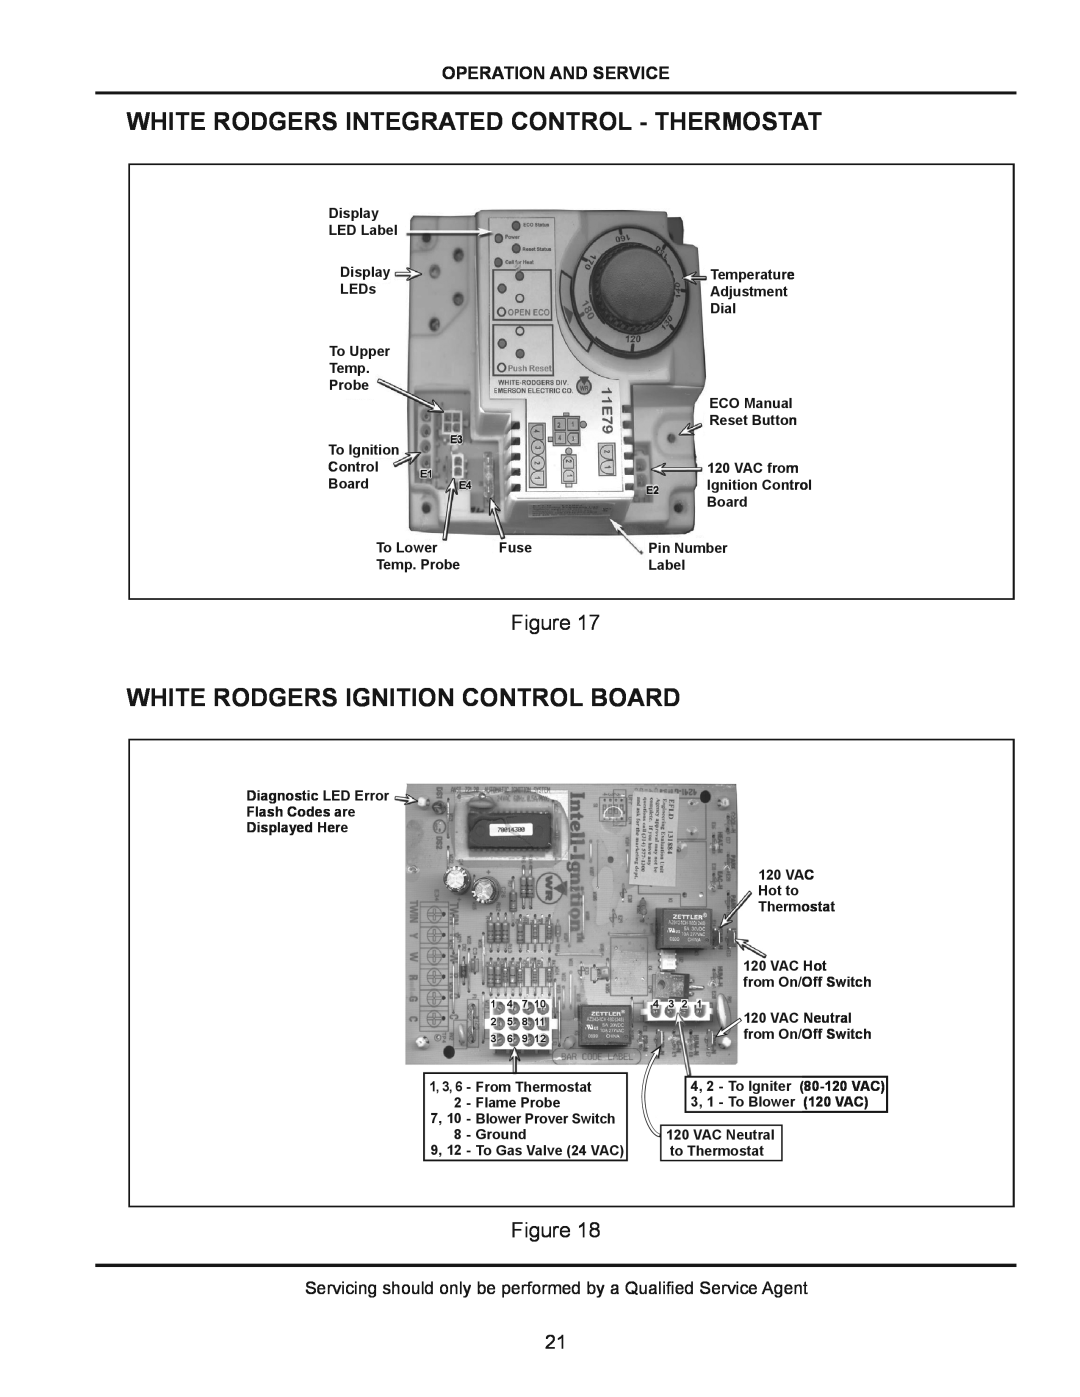 American Water Heater (A)BCG385T500-8N White Rodgers Integrated Control - Thermostat, White Rodgers Ignition Control Board 